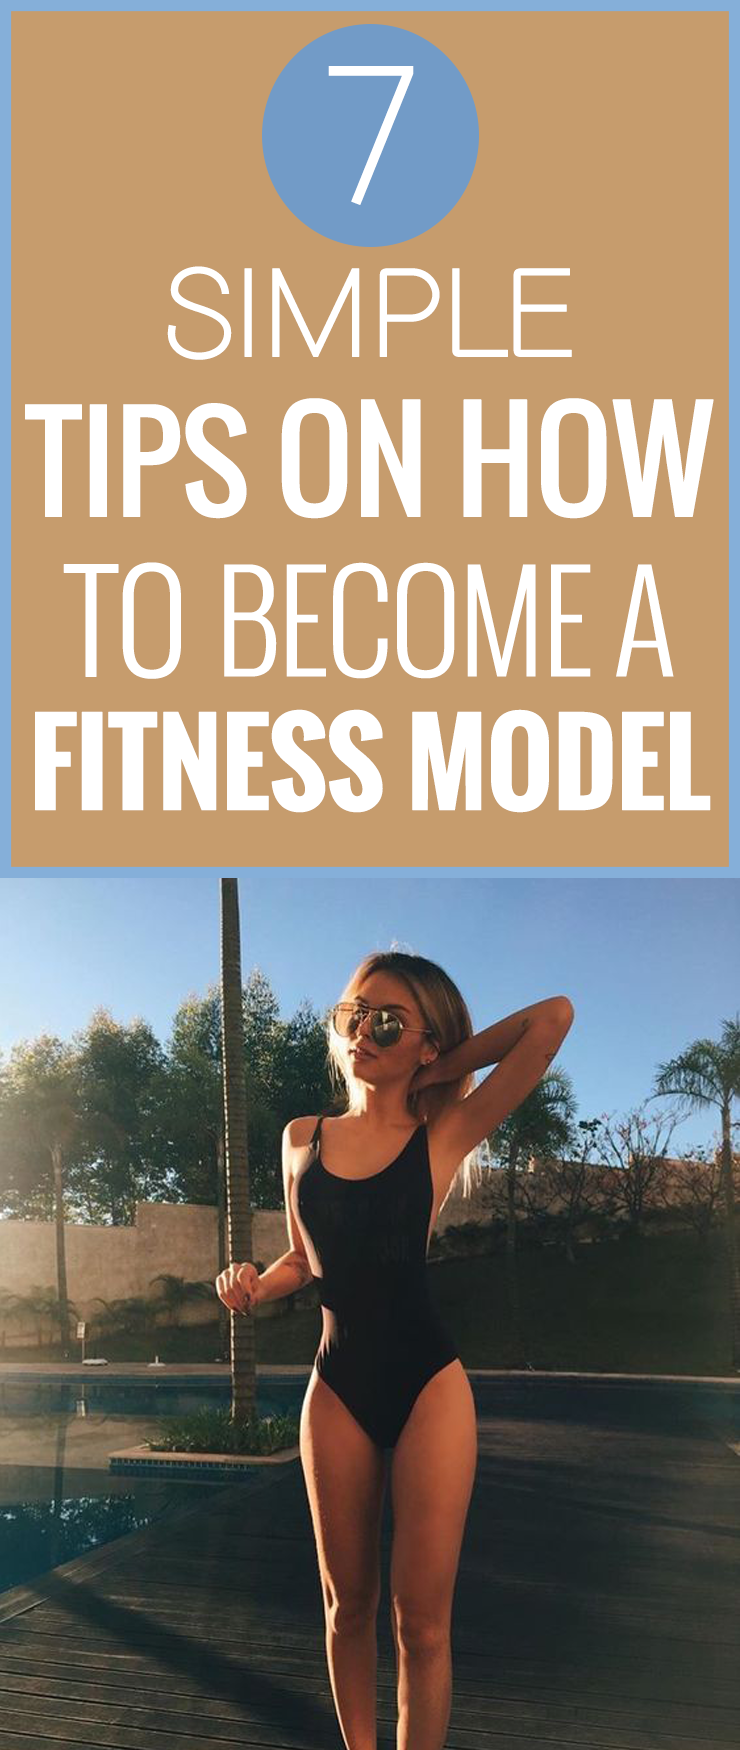 7 Simple Tips on How to Become a Fitness Model -   14 fitness model plan
 ideas